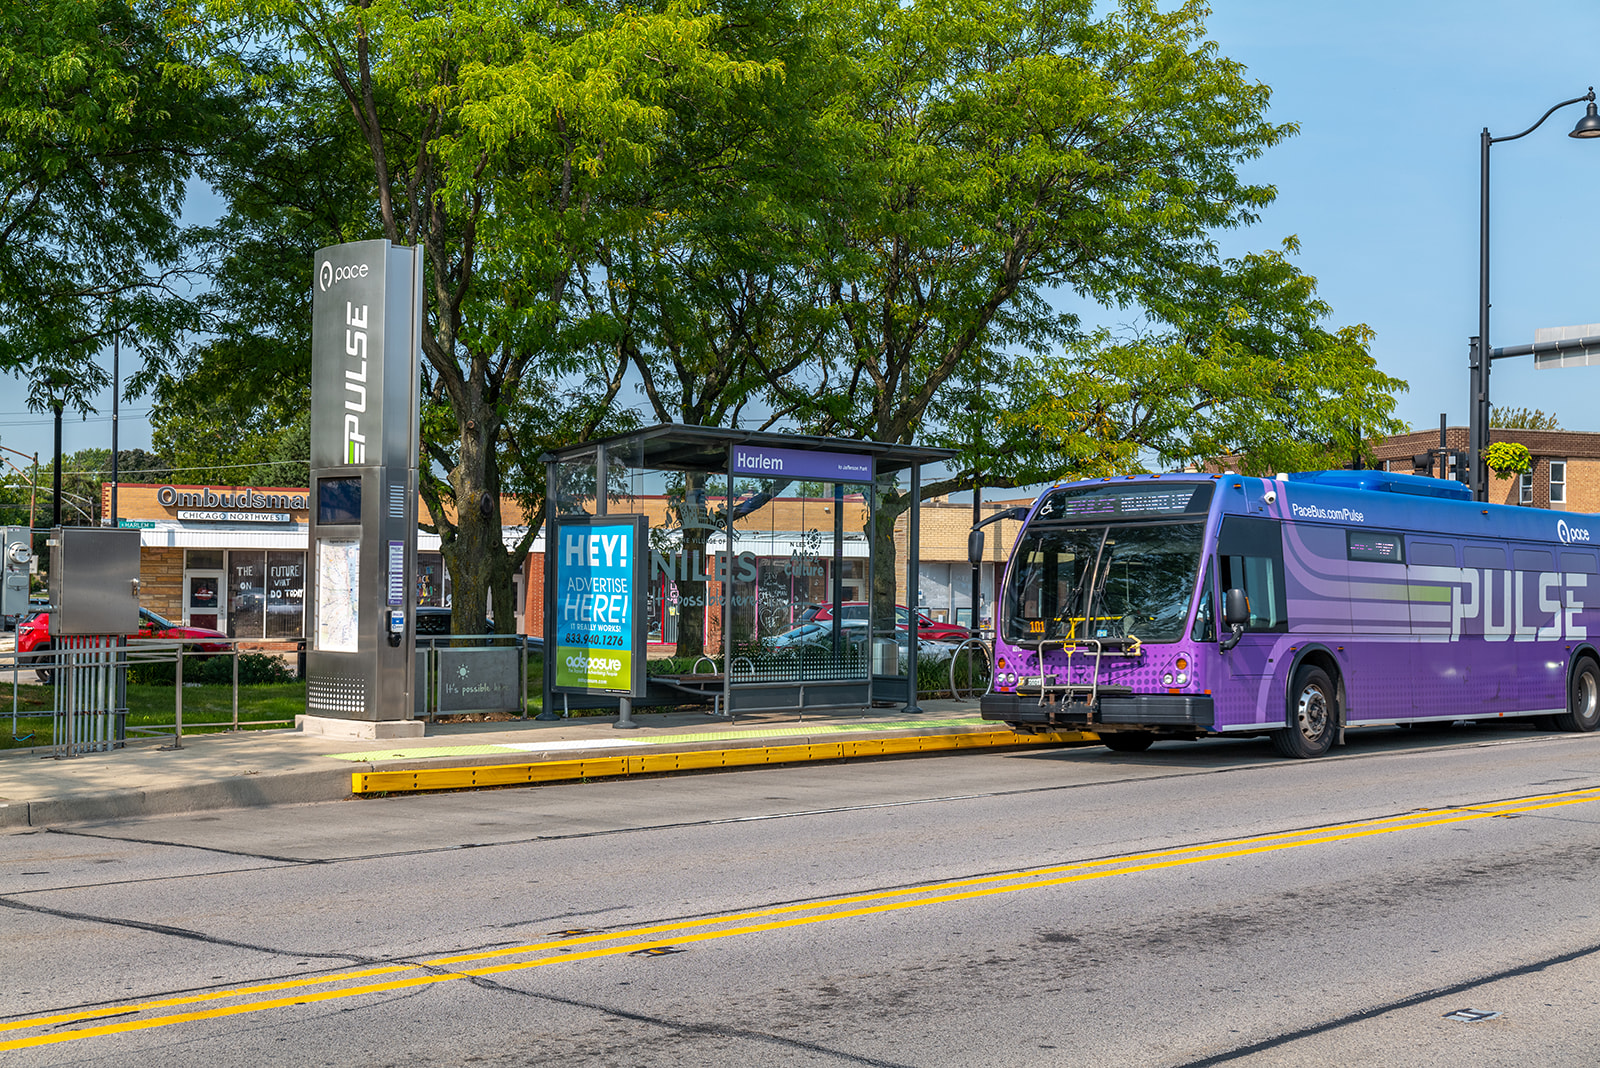 Image of Pulse Bus approaching station